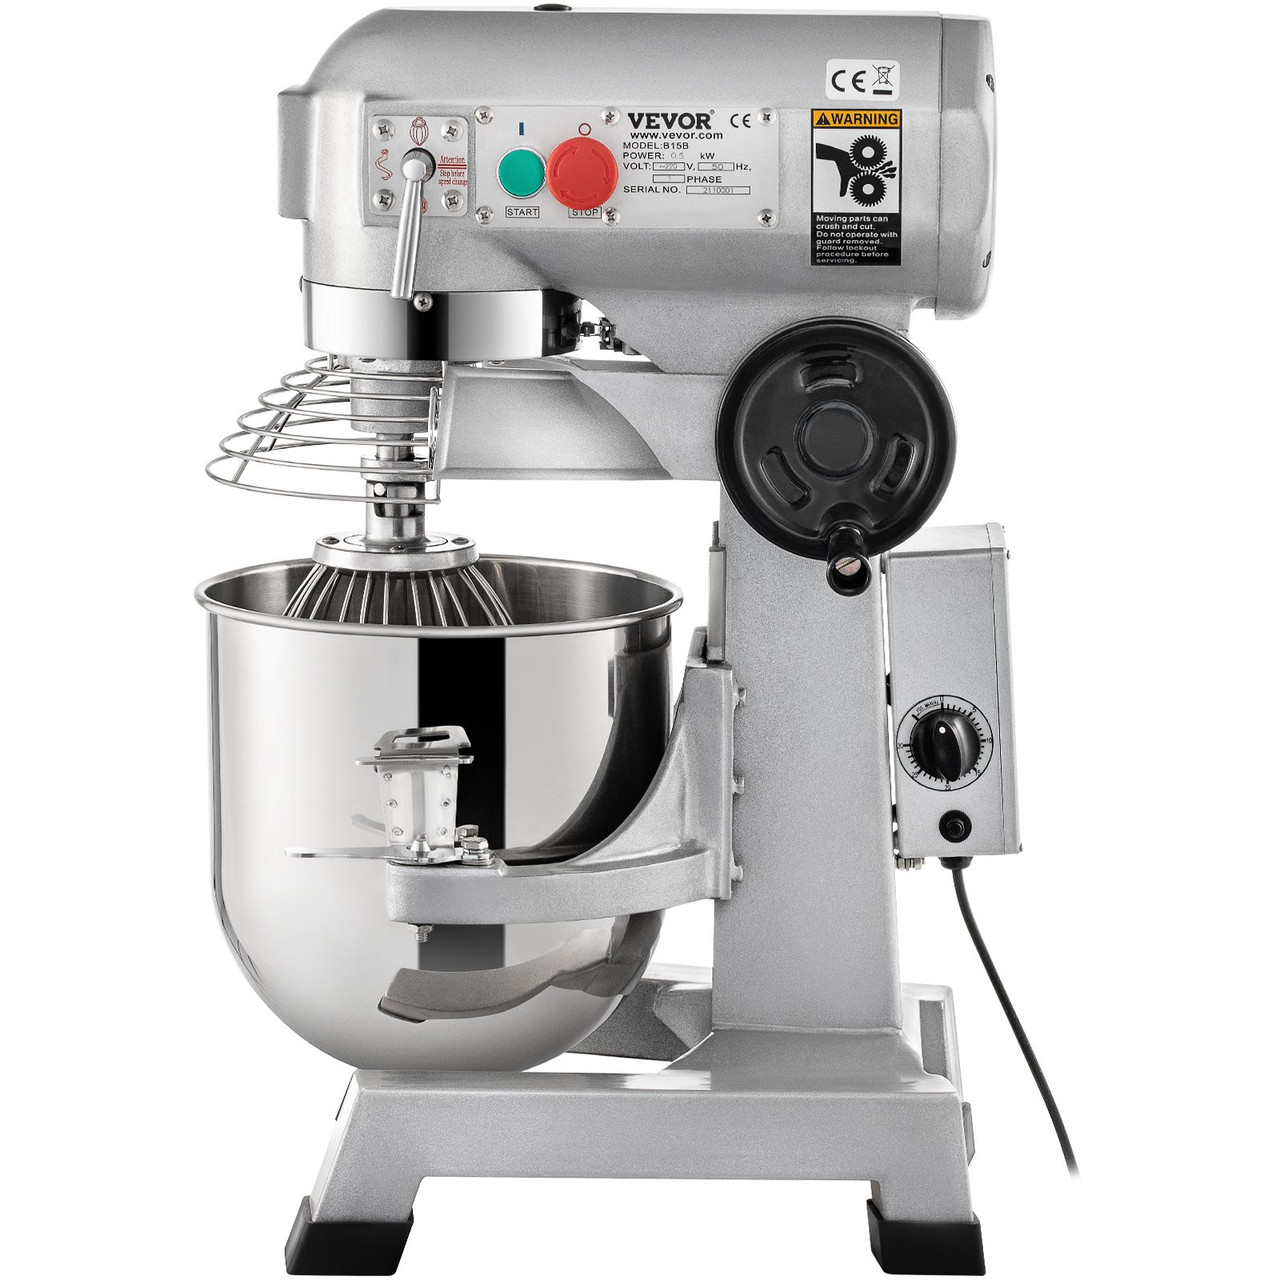 VEVOR Commercial Food Mixer 15qt Commercial Mixer with Timing Function 500W Stainless Steel Bowl Heavy Duty Electric Food Mixer Commercial with 3